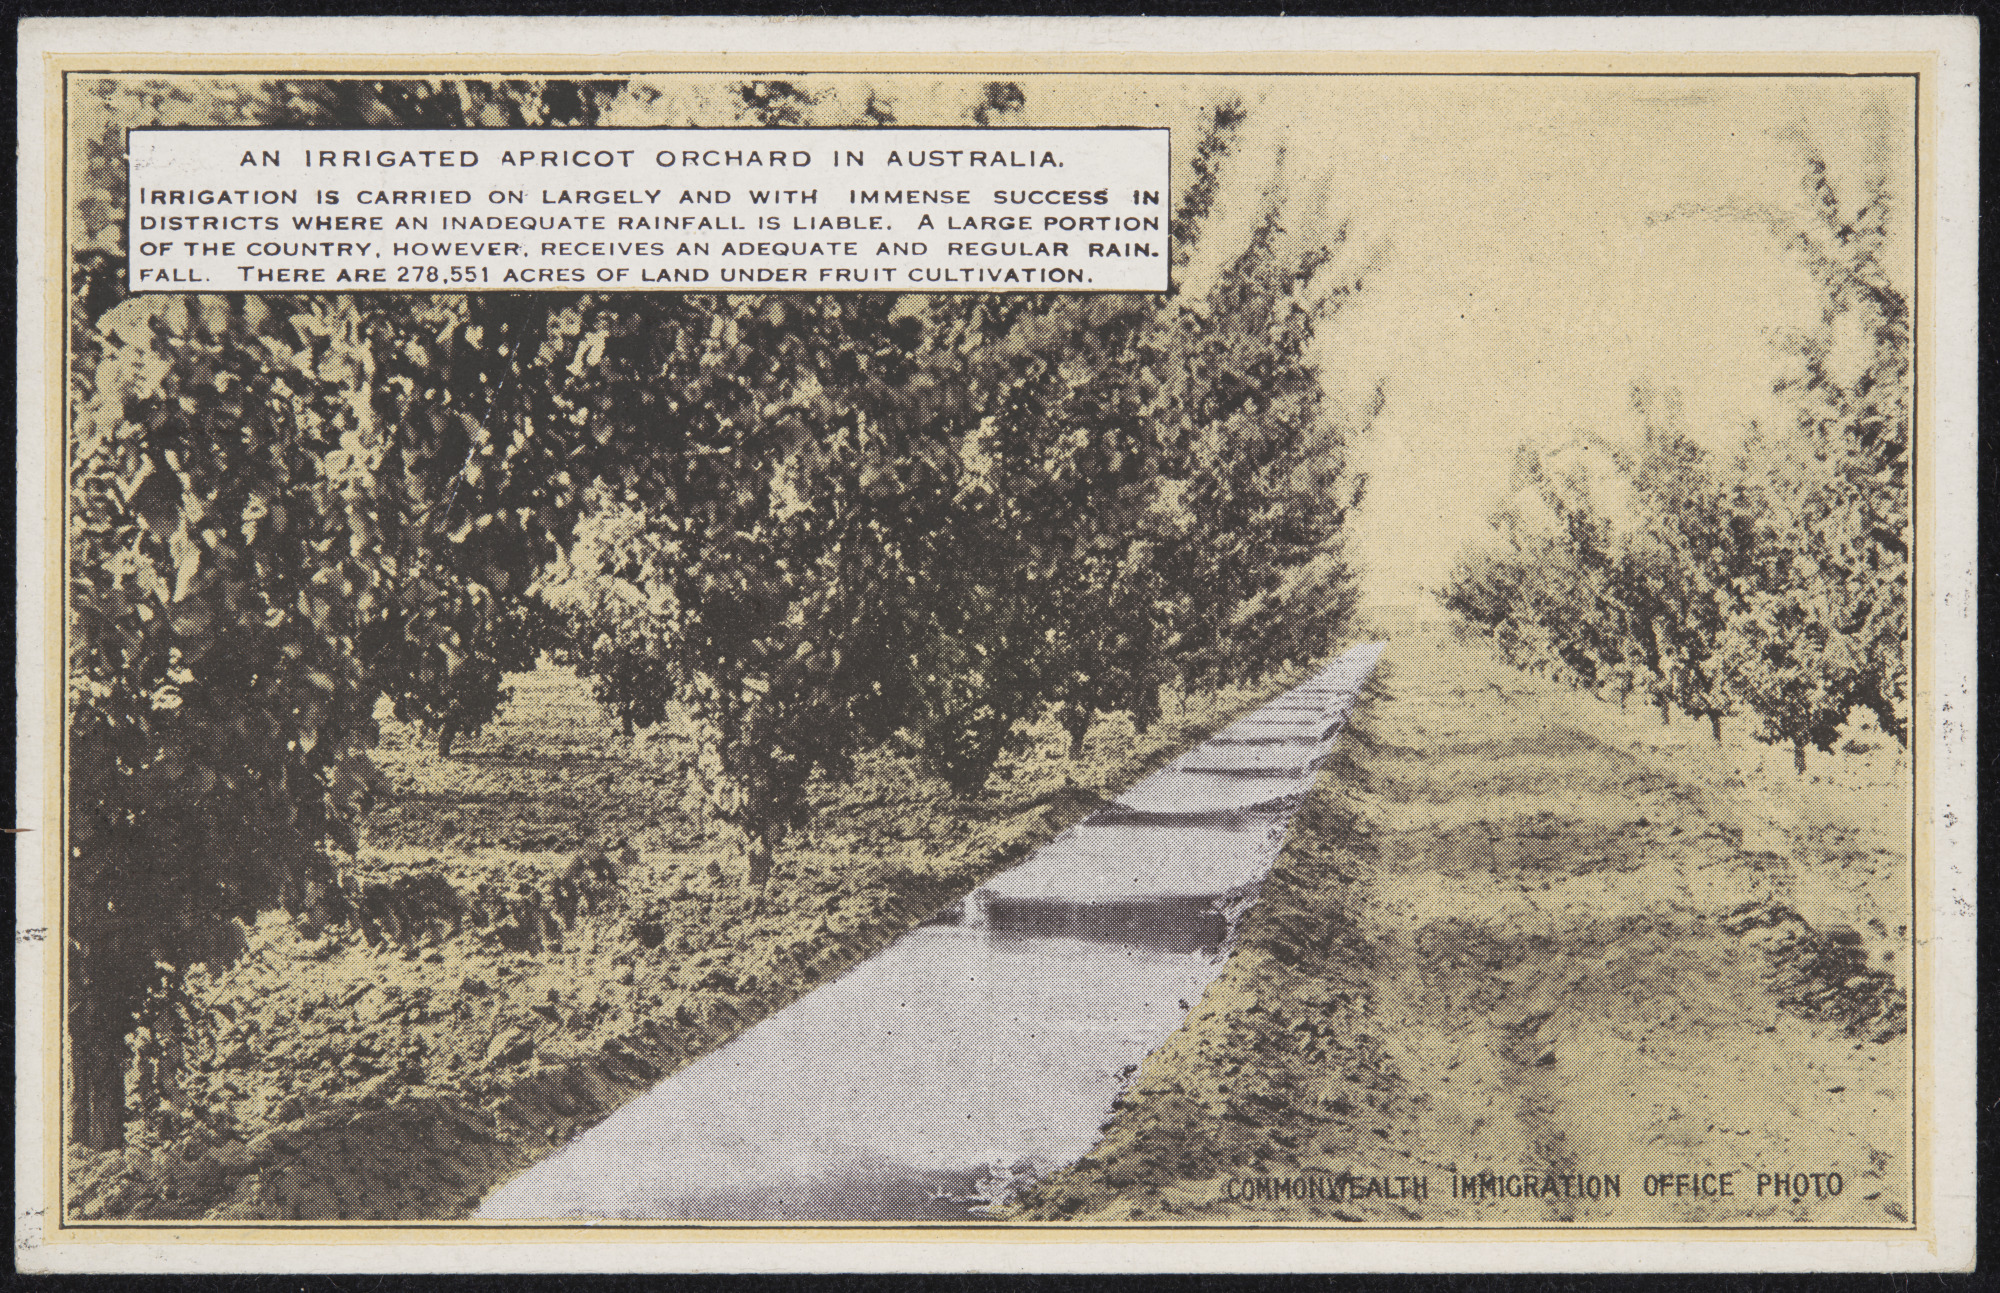 Postcard showing an irrigated apricot orchard in Australia.